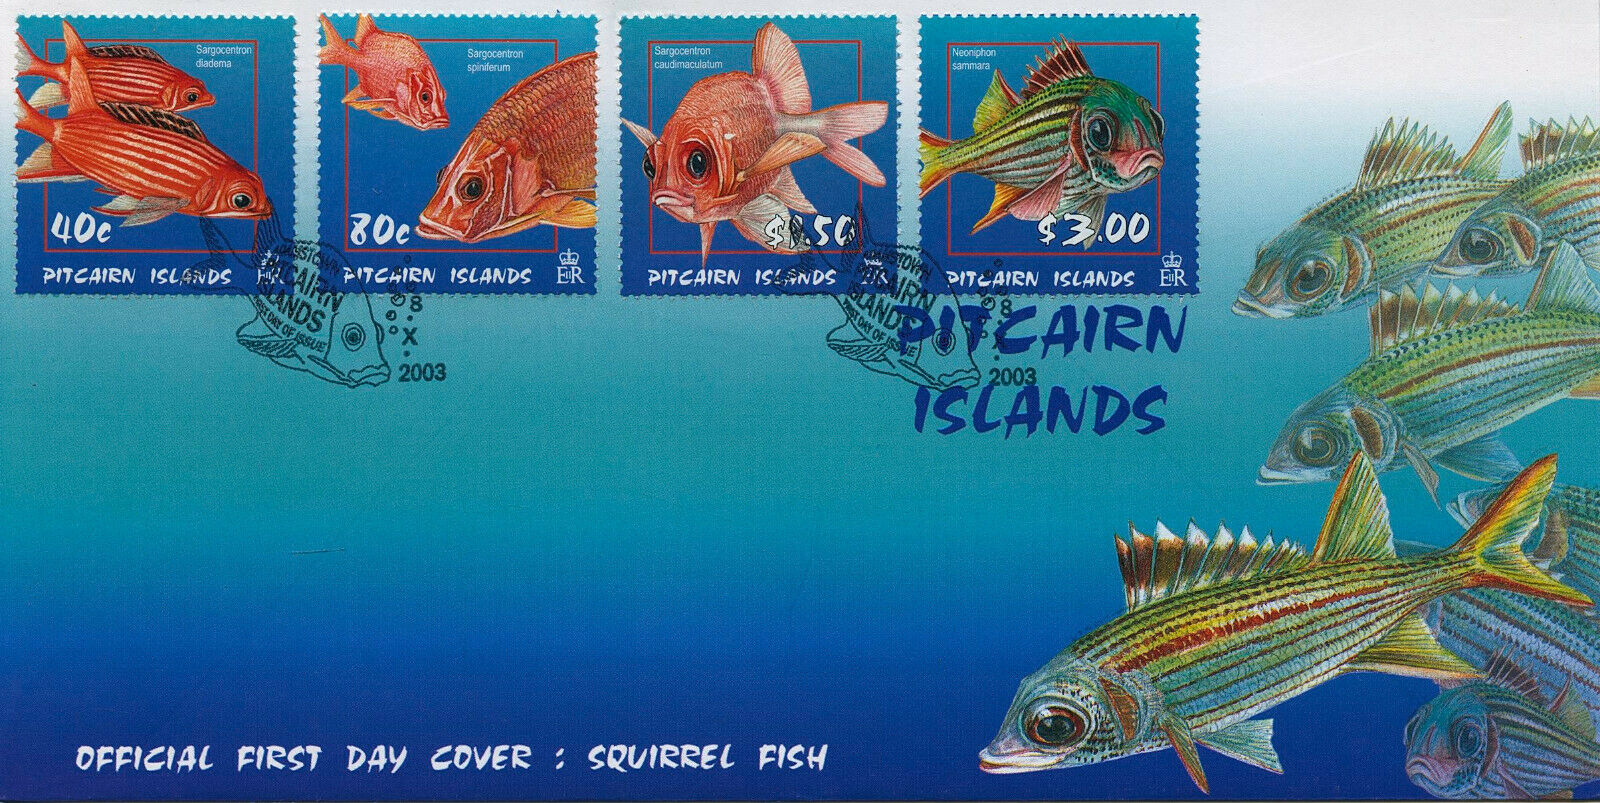 Pitcairn Islands 2003 FDC Fish Stamps Squirrelfishof Reef Fishes 4v Set